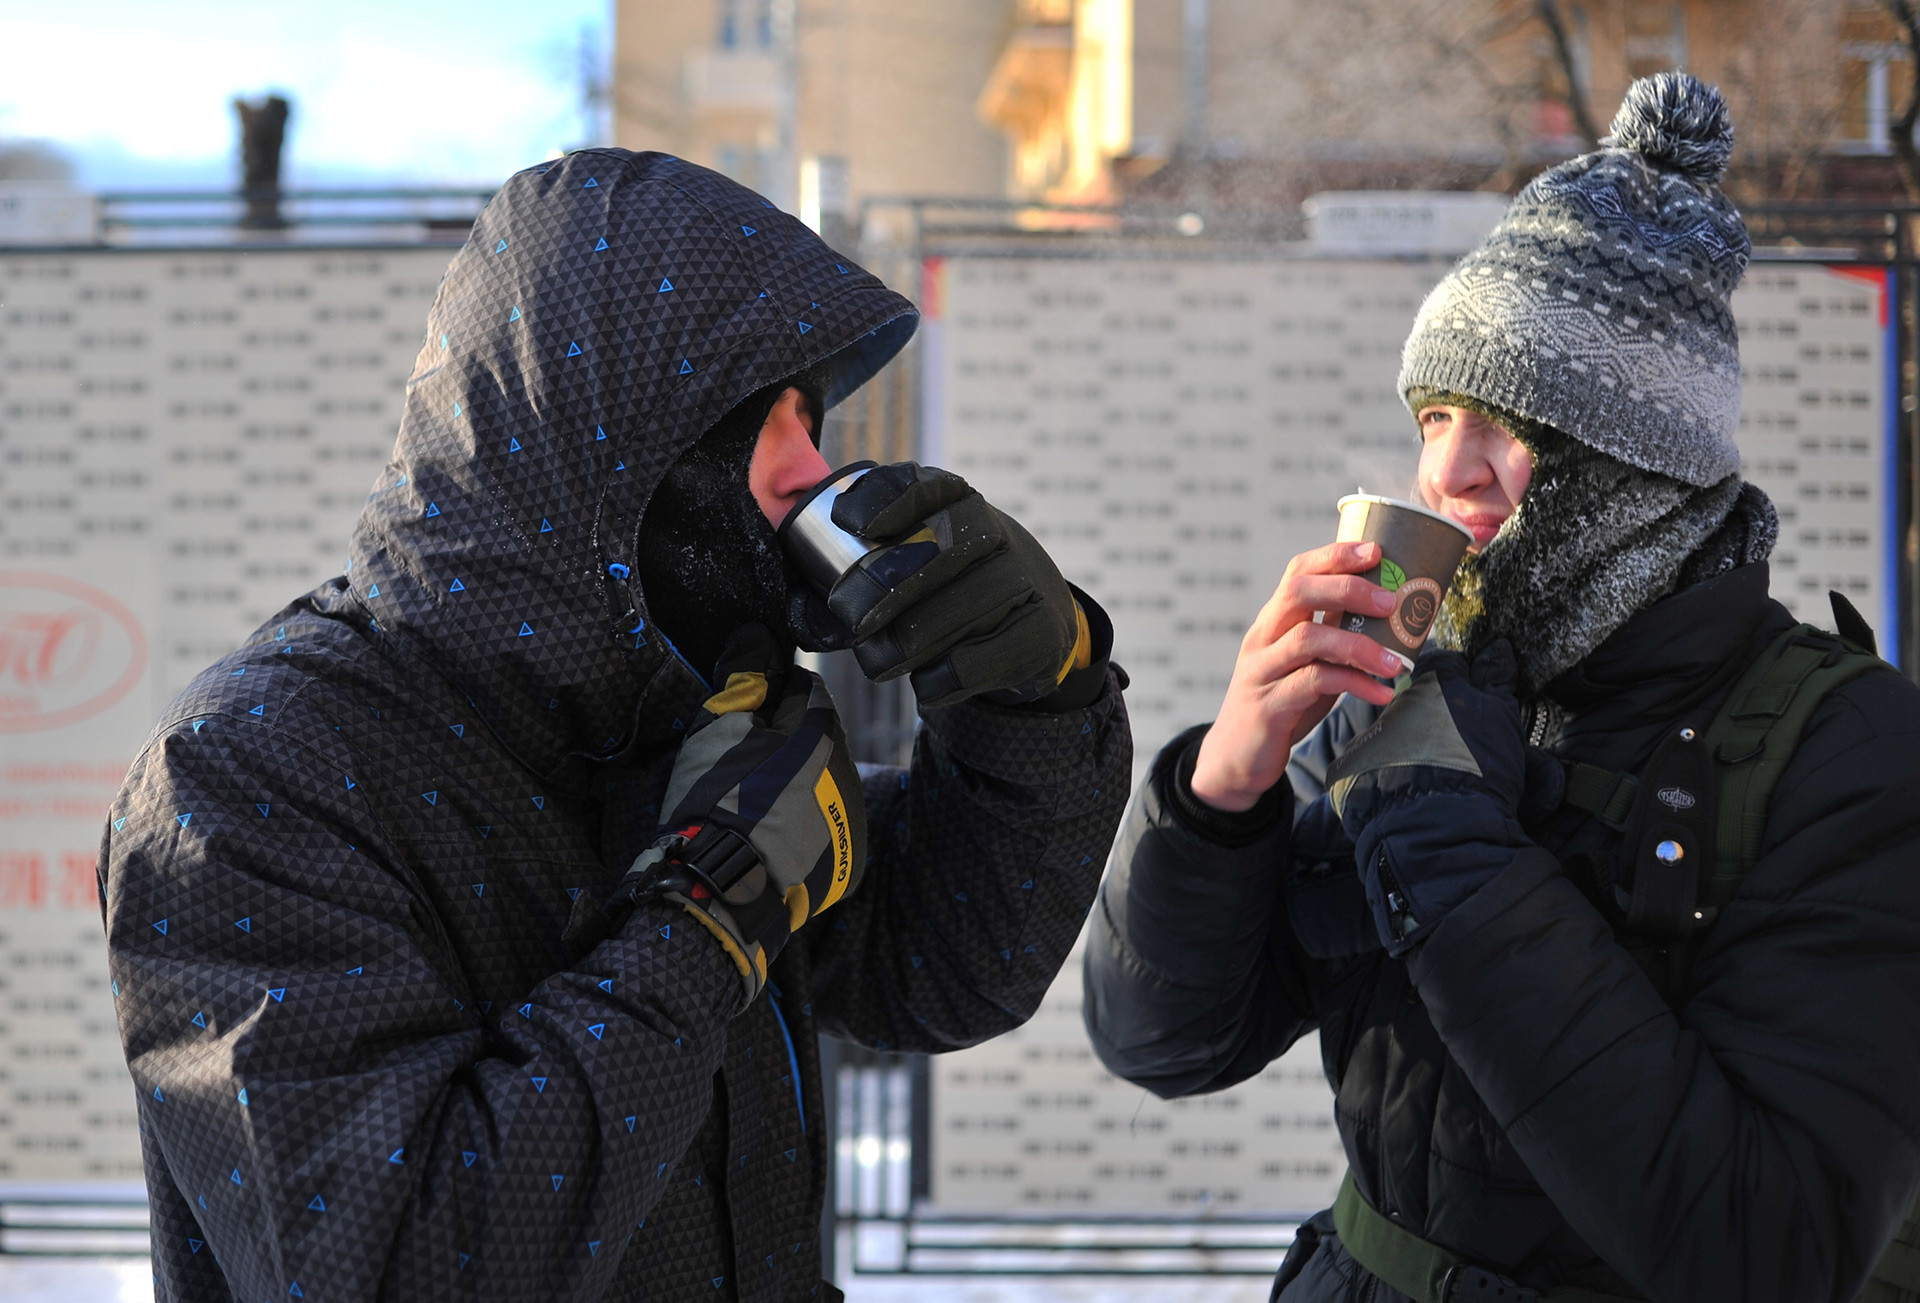 Hot drinks can be a great help during the cold winter.